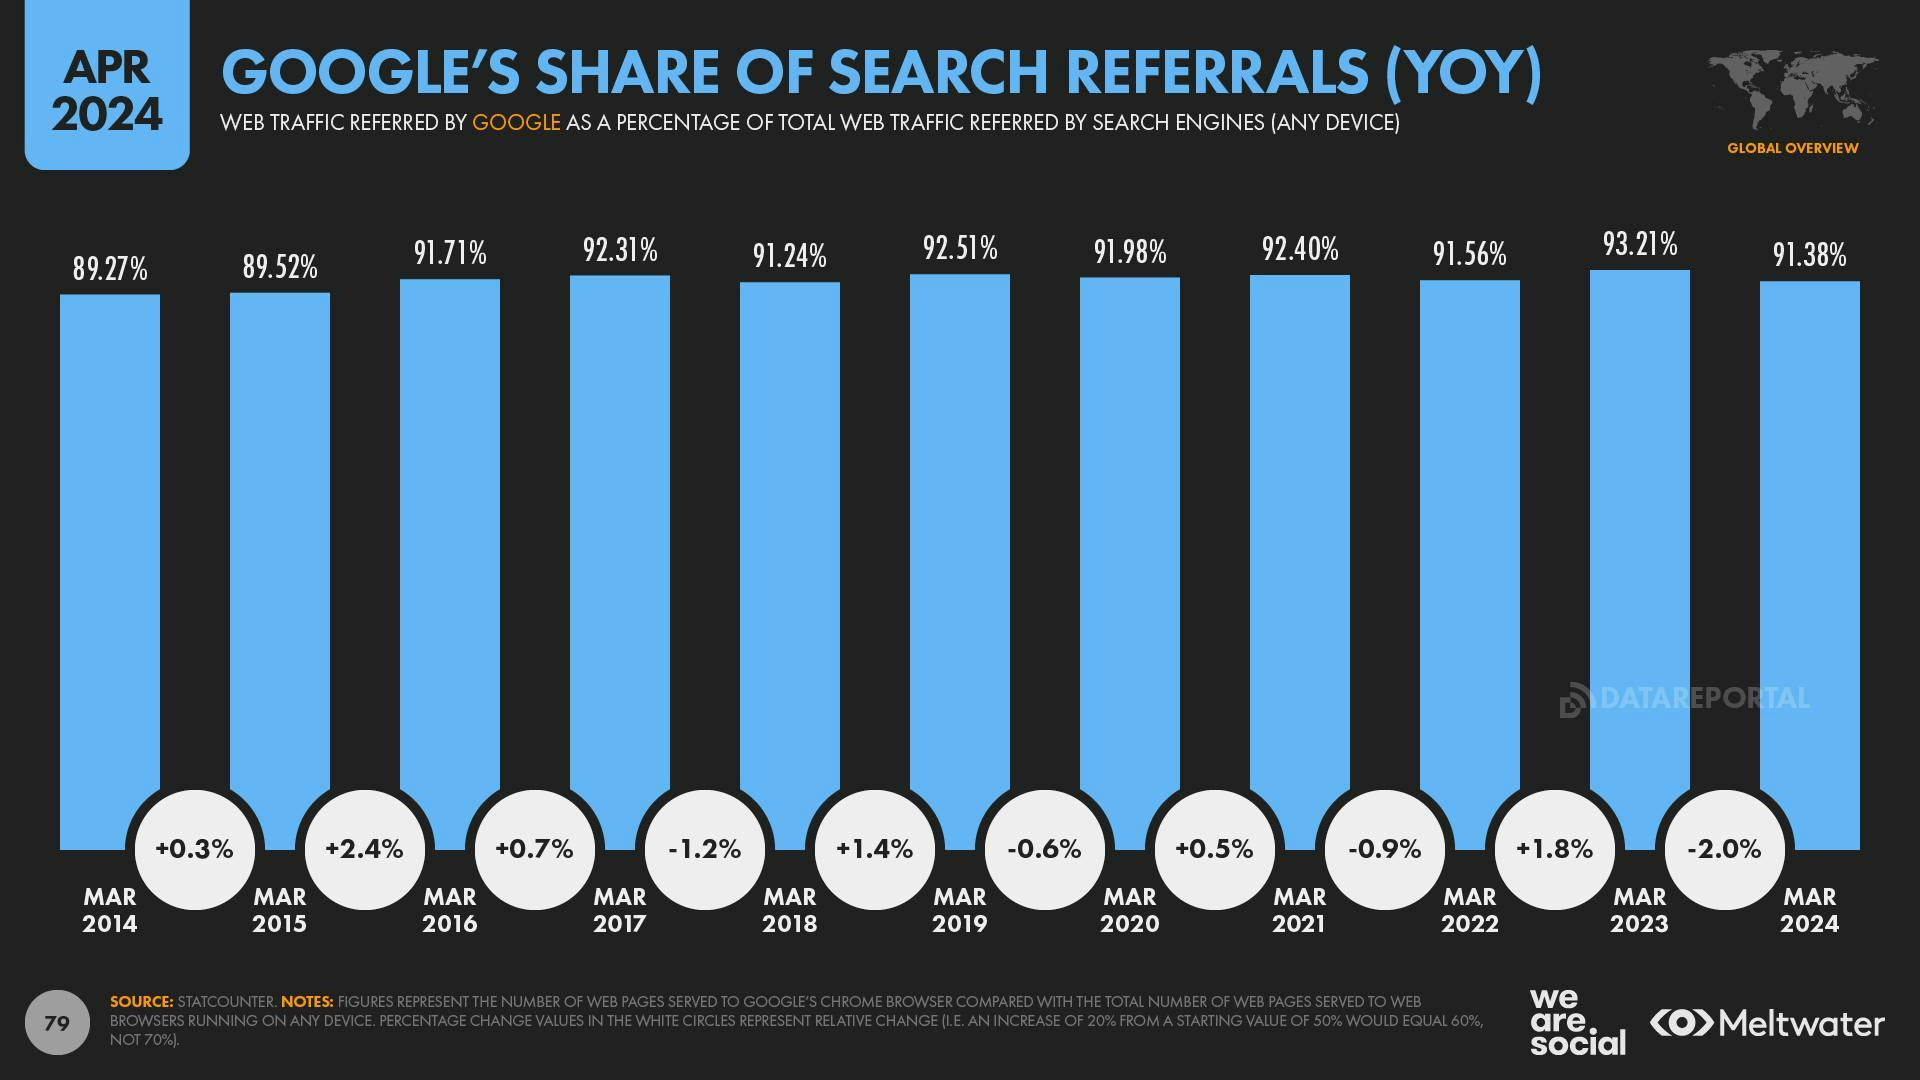 Google's share of search referrals (YOY)